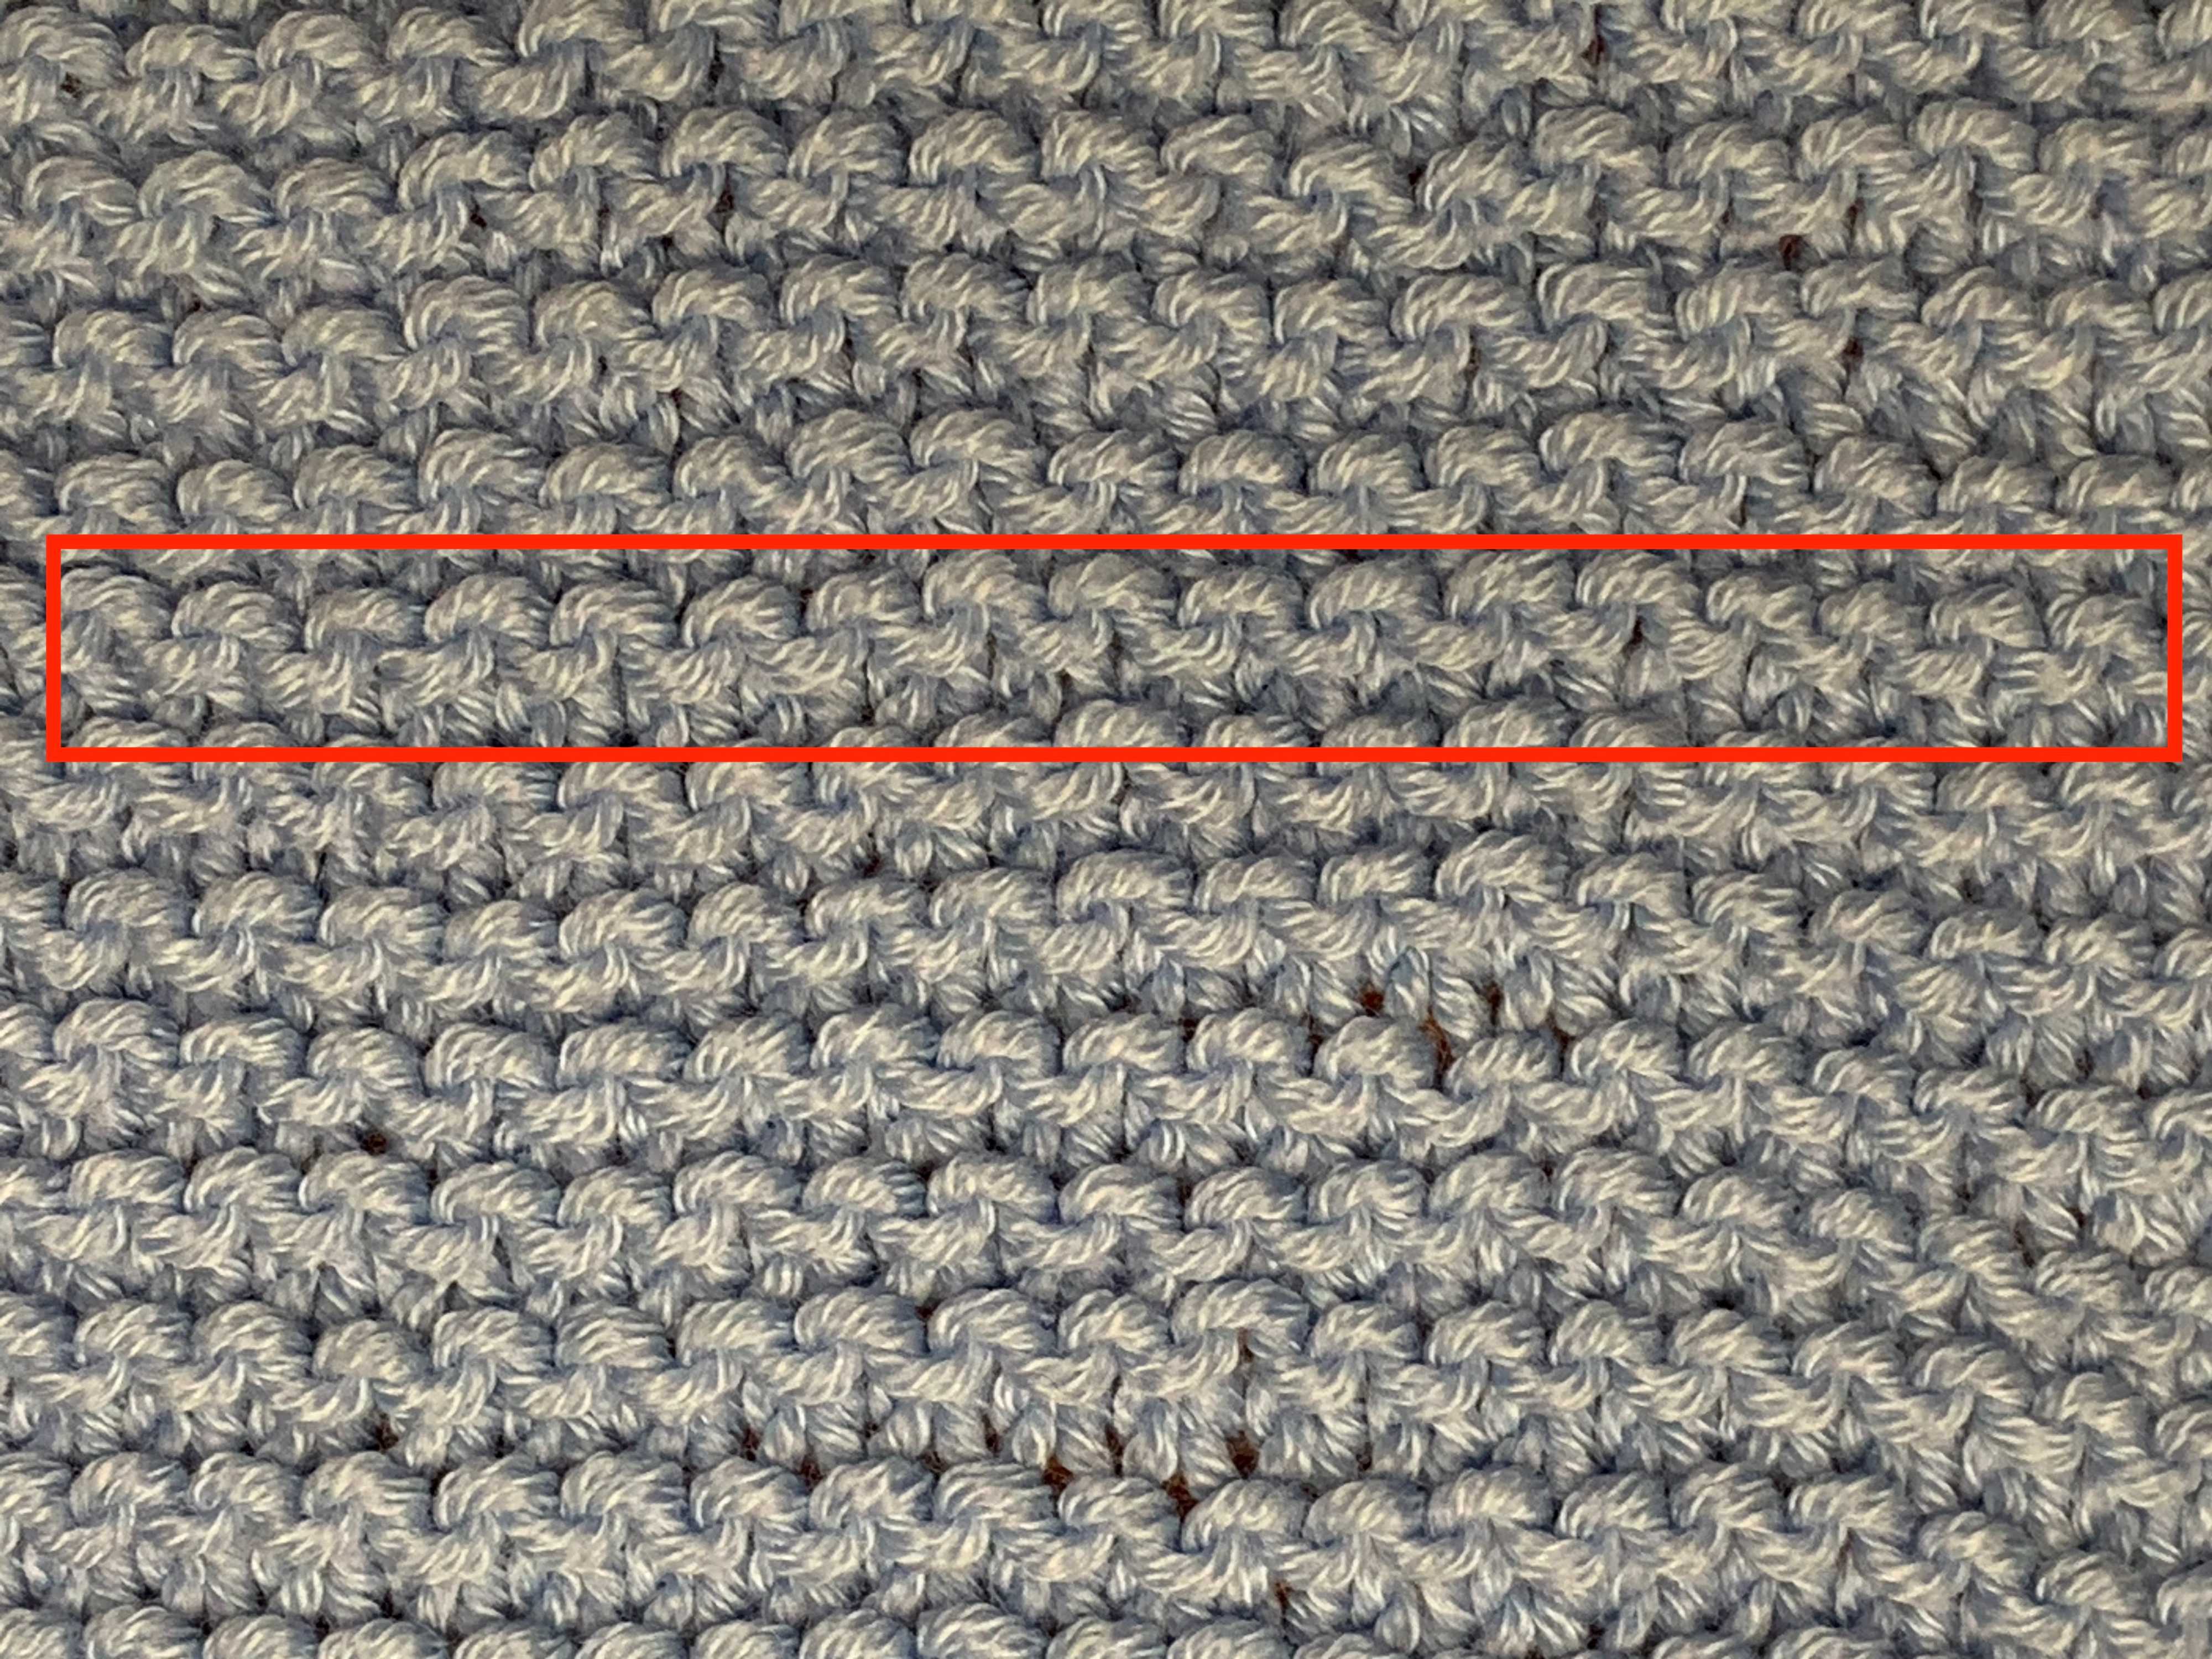 Garter stitch. A single garter ridge, formed of two rows of knits, is marked in red.